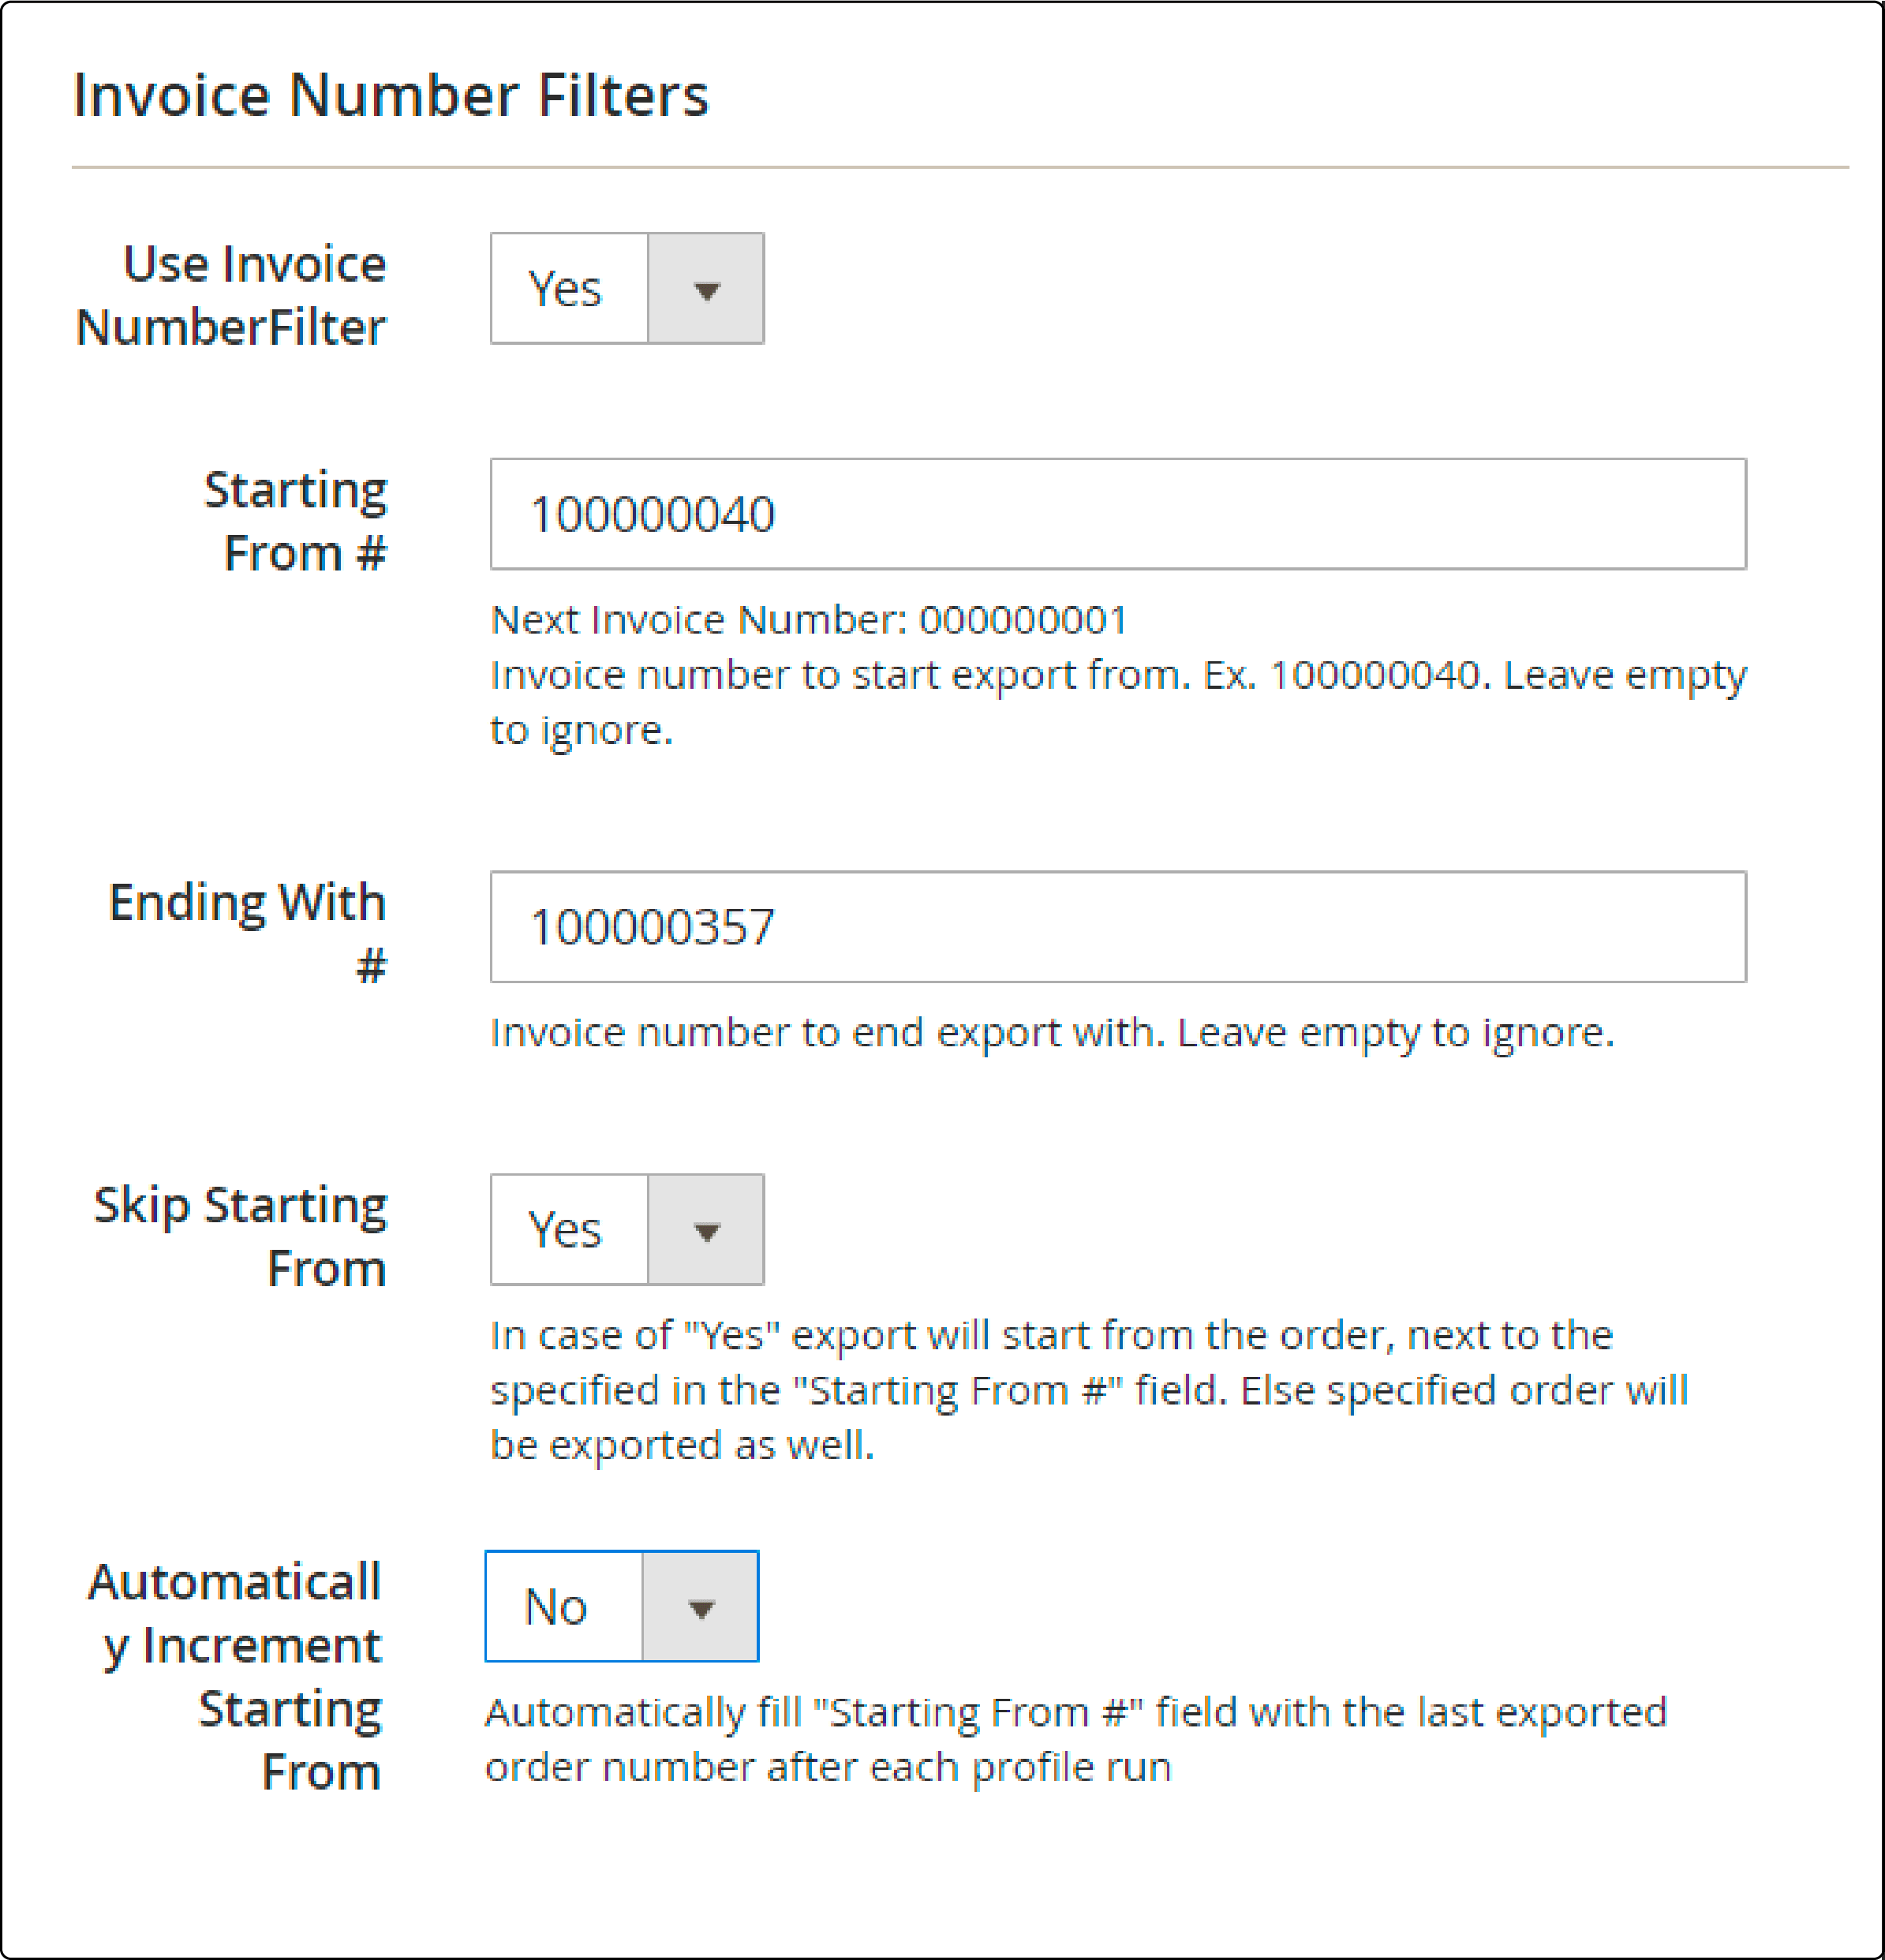 Configuring invoice number filters in Magento export profile
